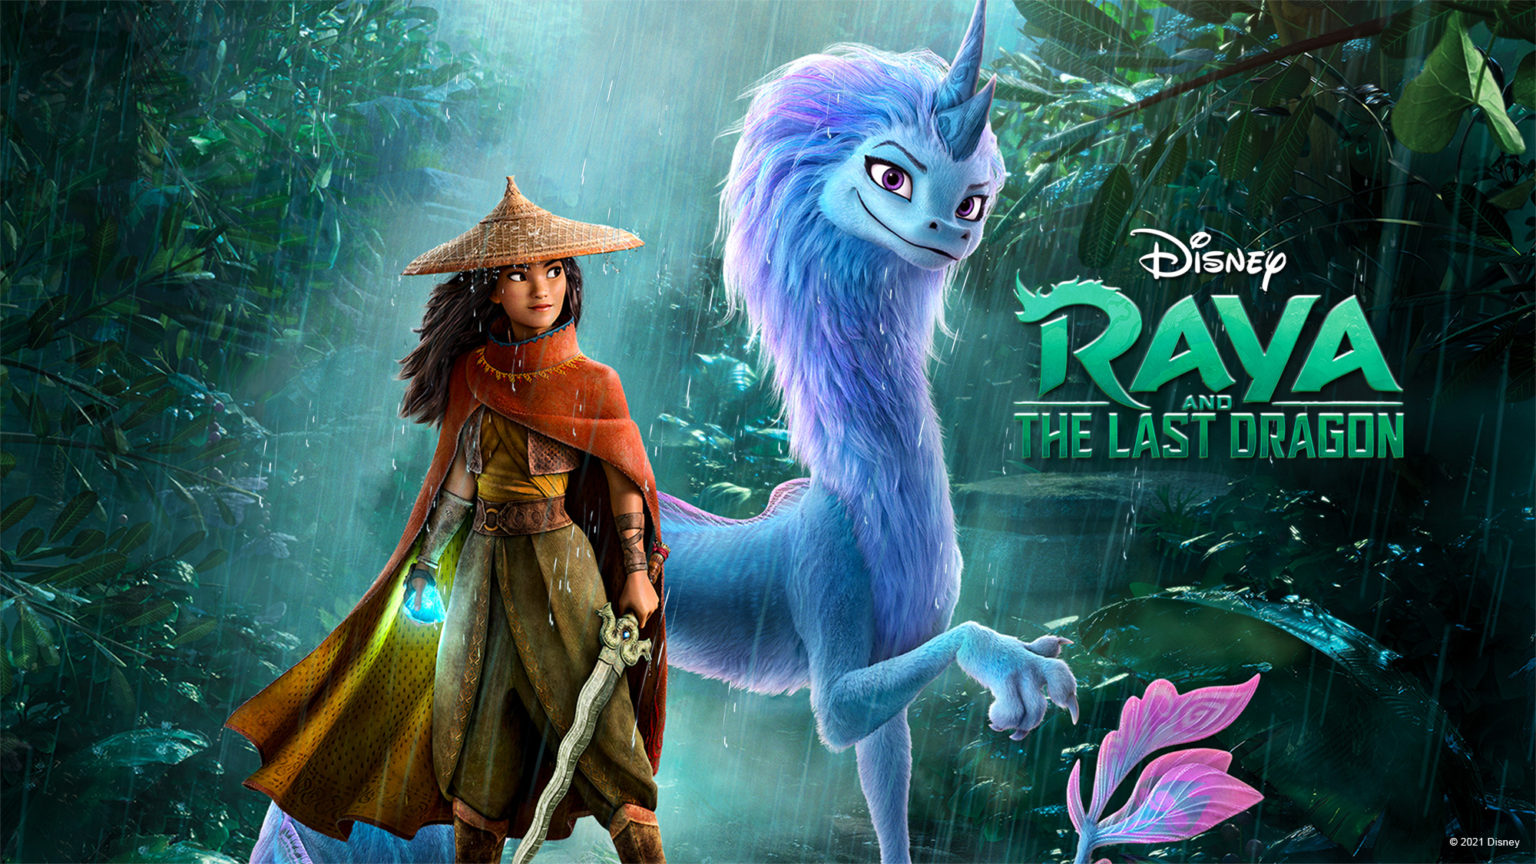 Disney's new Raya and the Last Dragon to stream on OSN straight from